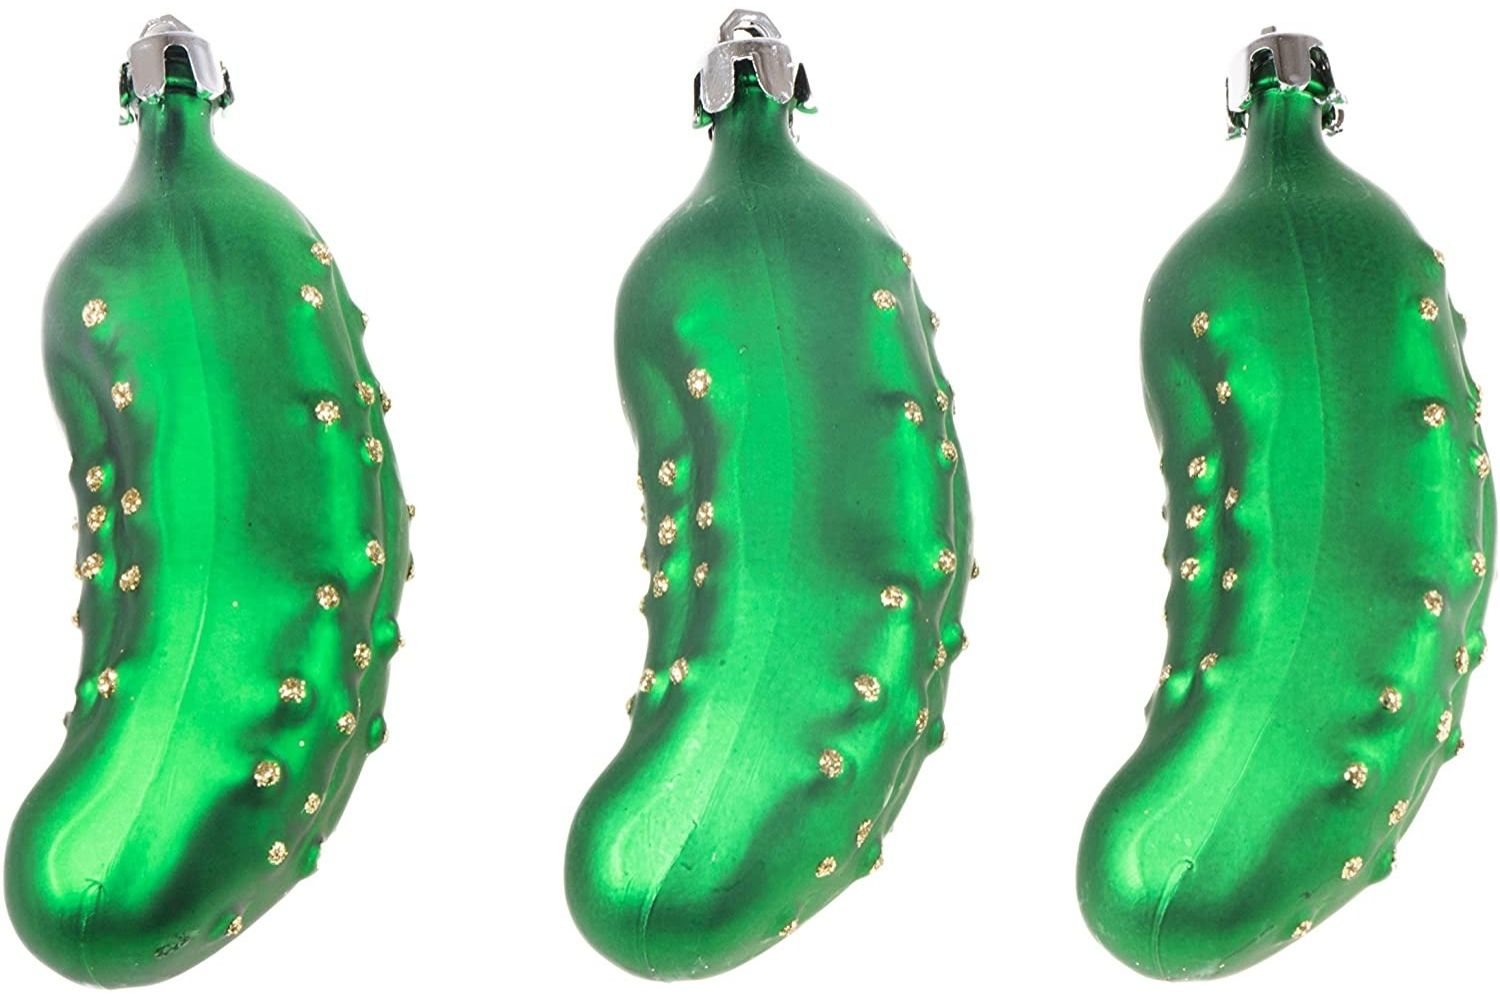 The Best Christmas Ornaments Option: Clever Creations Pickle Christmas Ornament Set